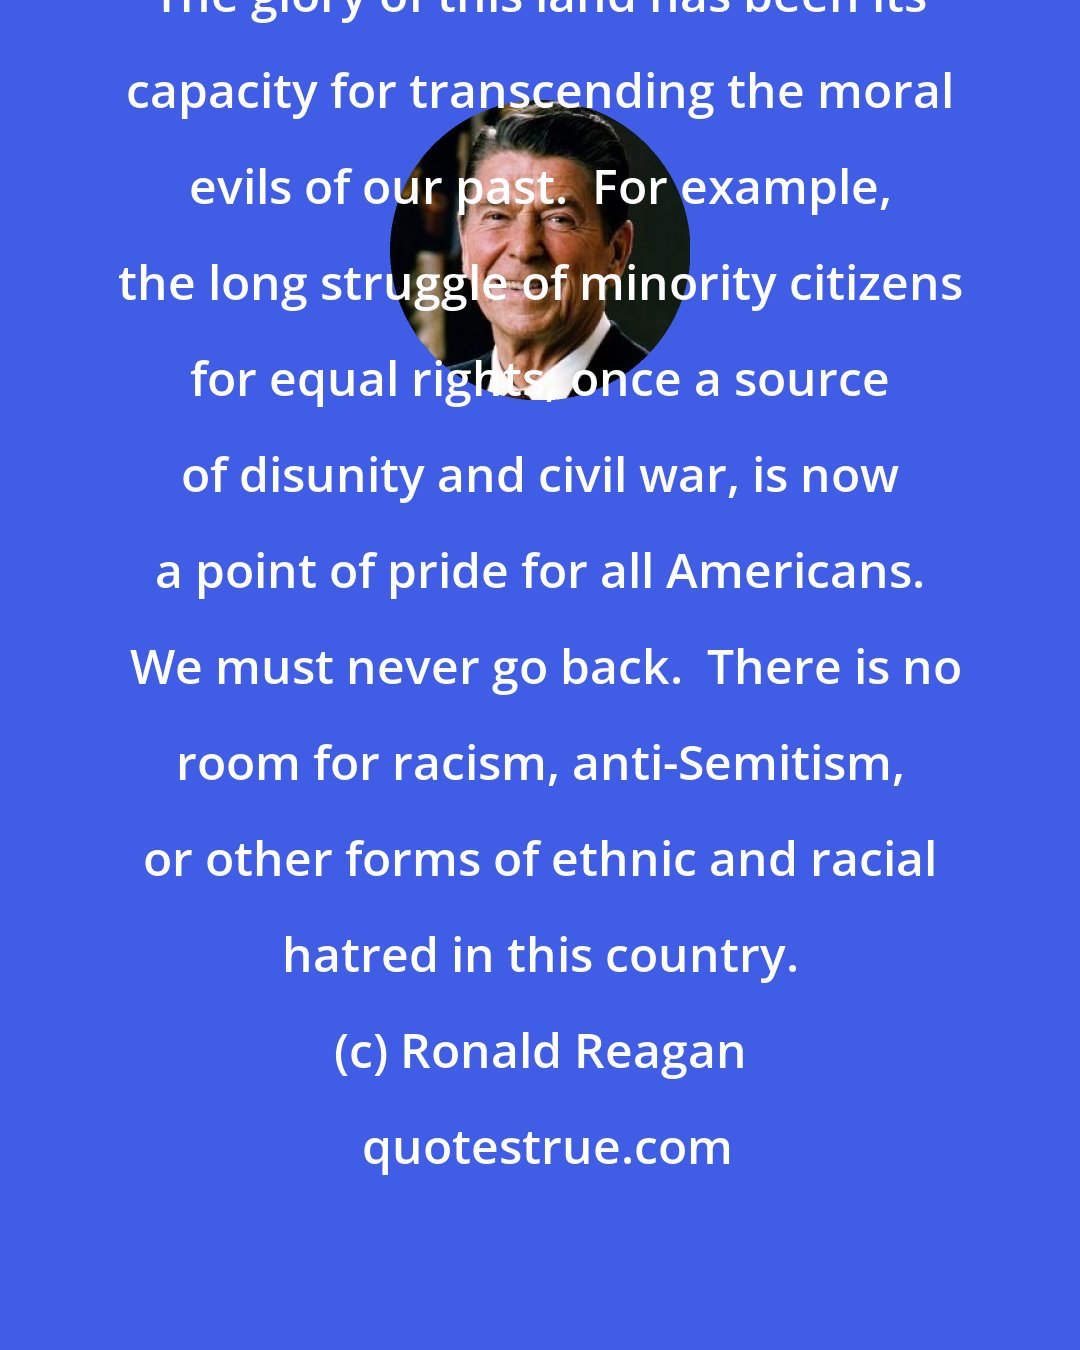 Ronald Reagan: The glory of this land has been its capacity for transcending the moral evils of our past.  For example, the long struggle of minority citizens for equal rights, once a source of disunity and civil war, is now a point of pride for all Americans.  We must never go back.  There is no room for racism, anti-Semitism, or other forms of ethnic and racial hatred in this country.